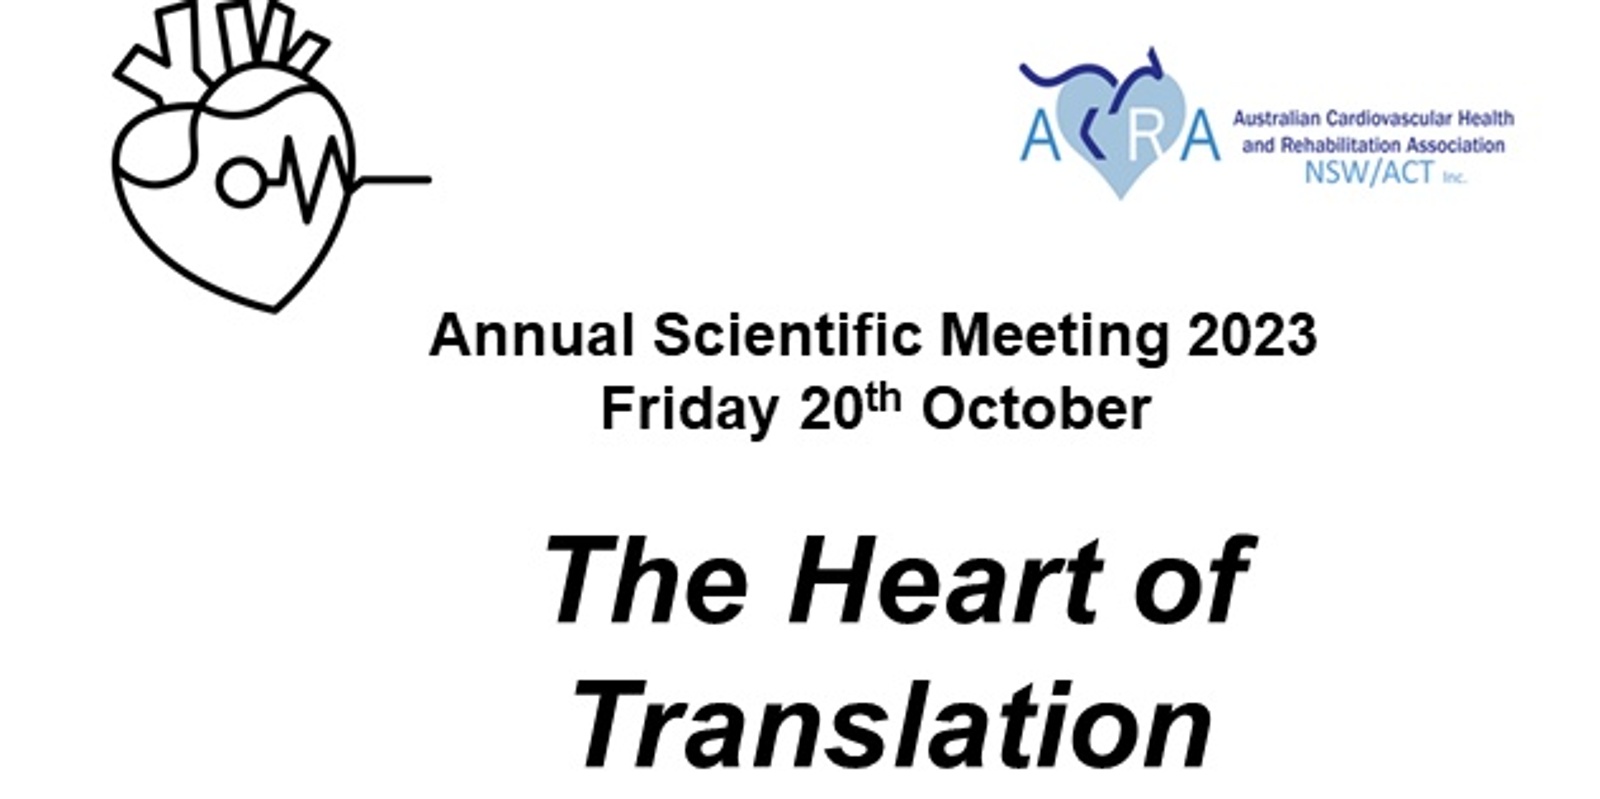 Banner image for Australian Cardiovascular Health and Rehabilitation Association NSW/ACT Annual Scientific Meeting 2023